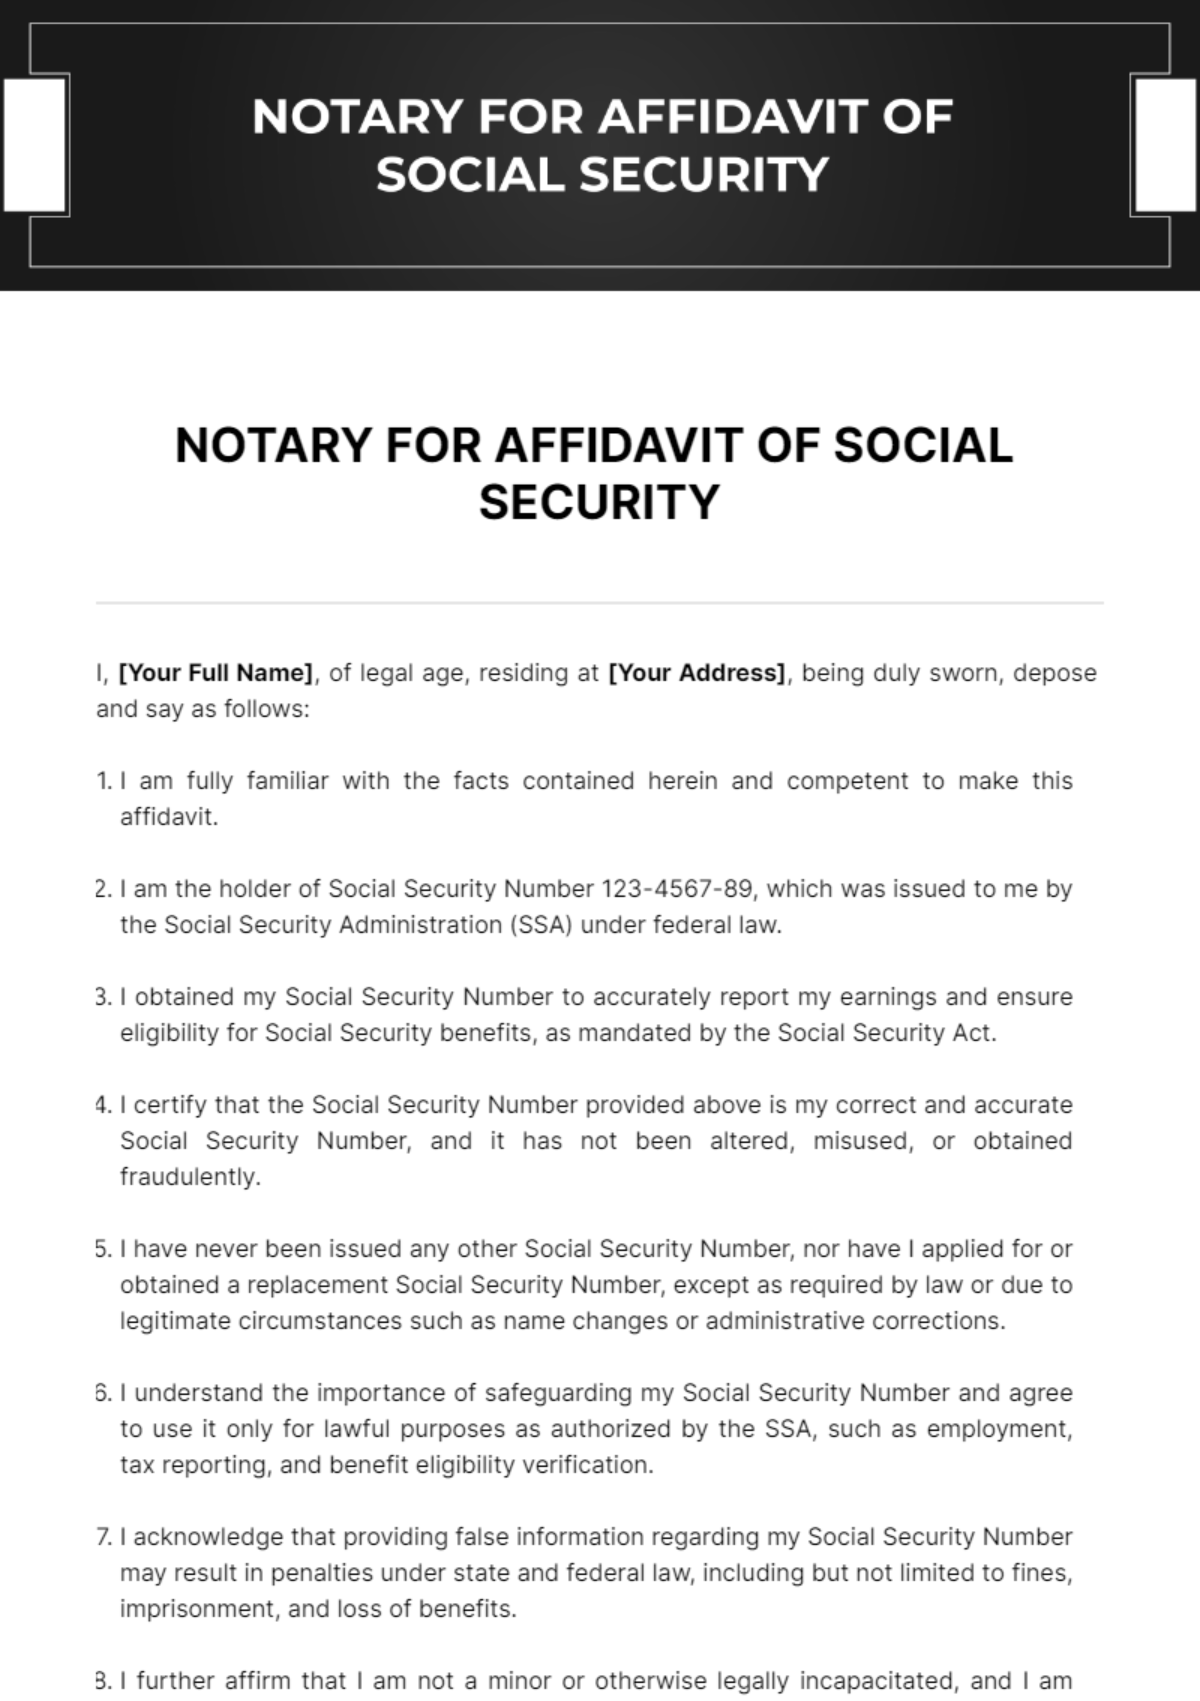 Notary For Affidavit Of Social Security Template